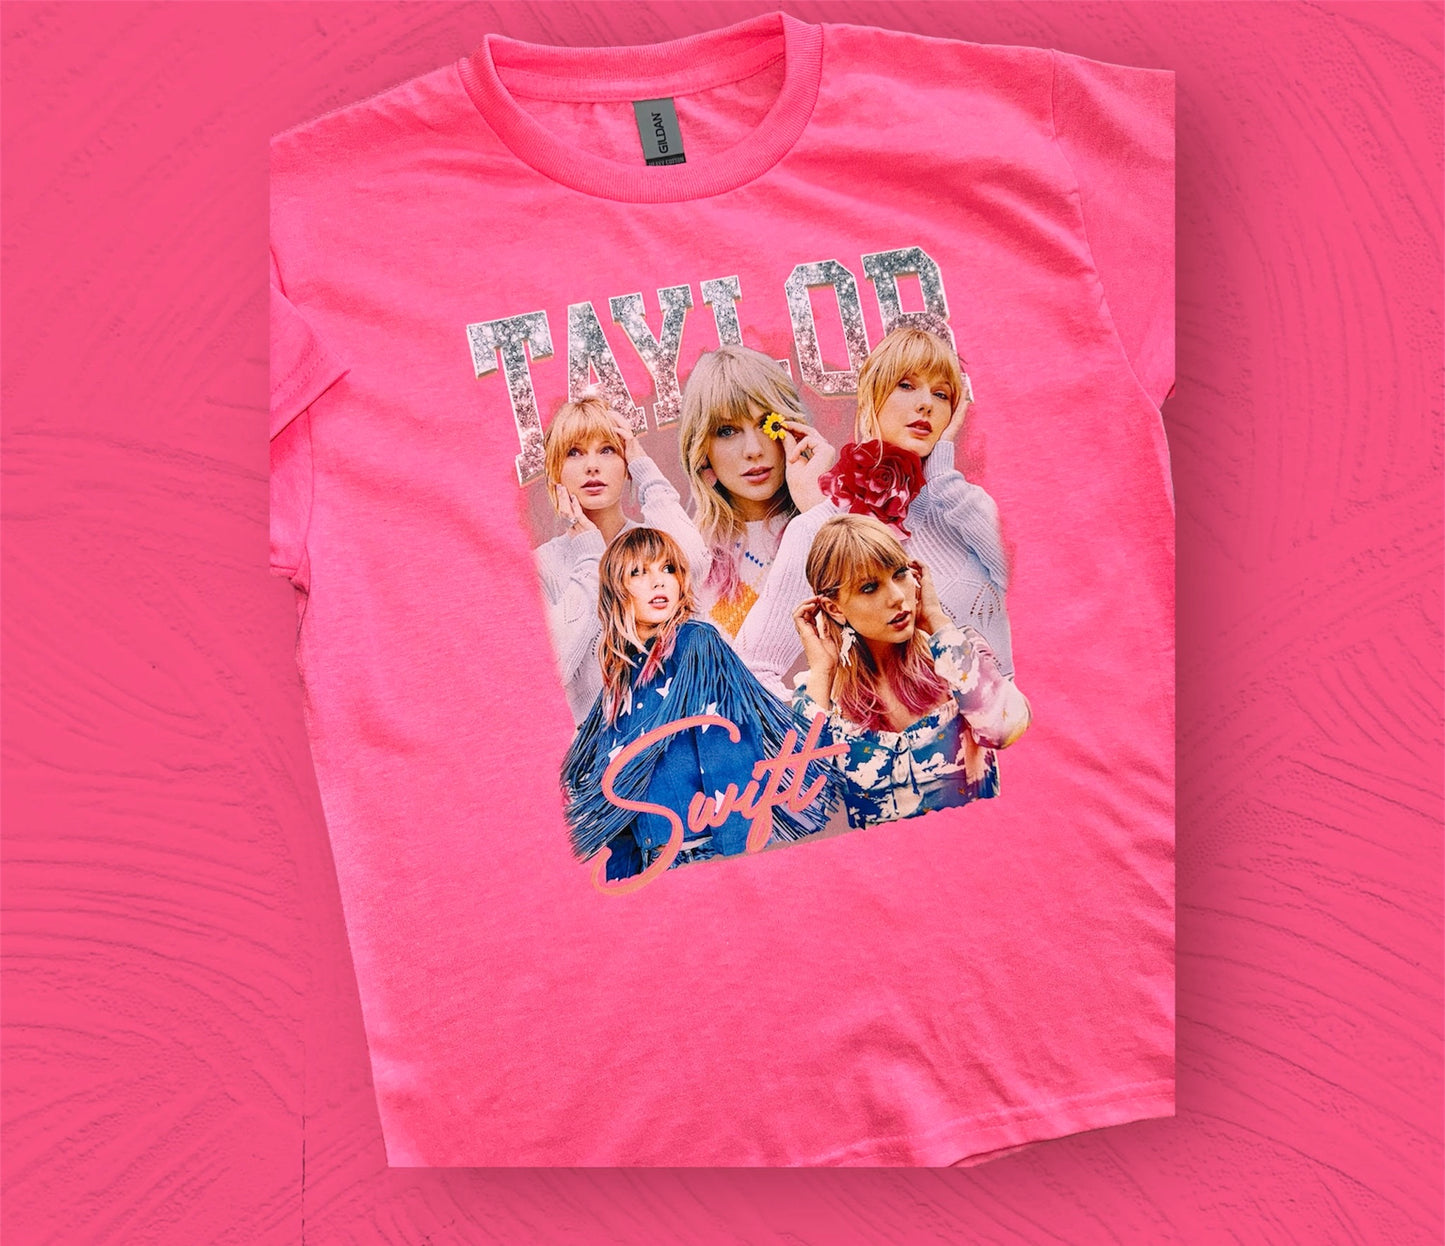 In-Stock Taylor Safety Pink Youth Tee